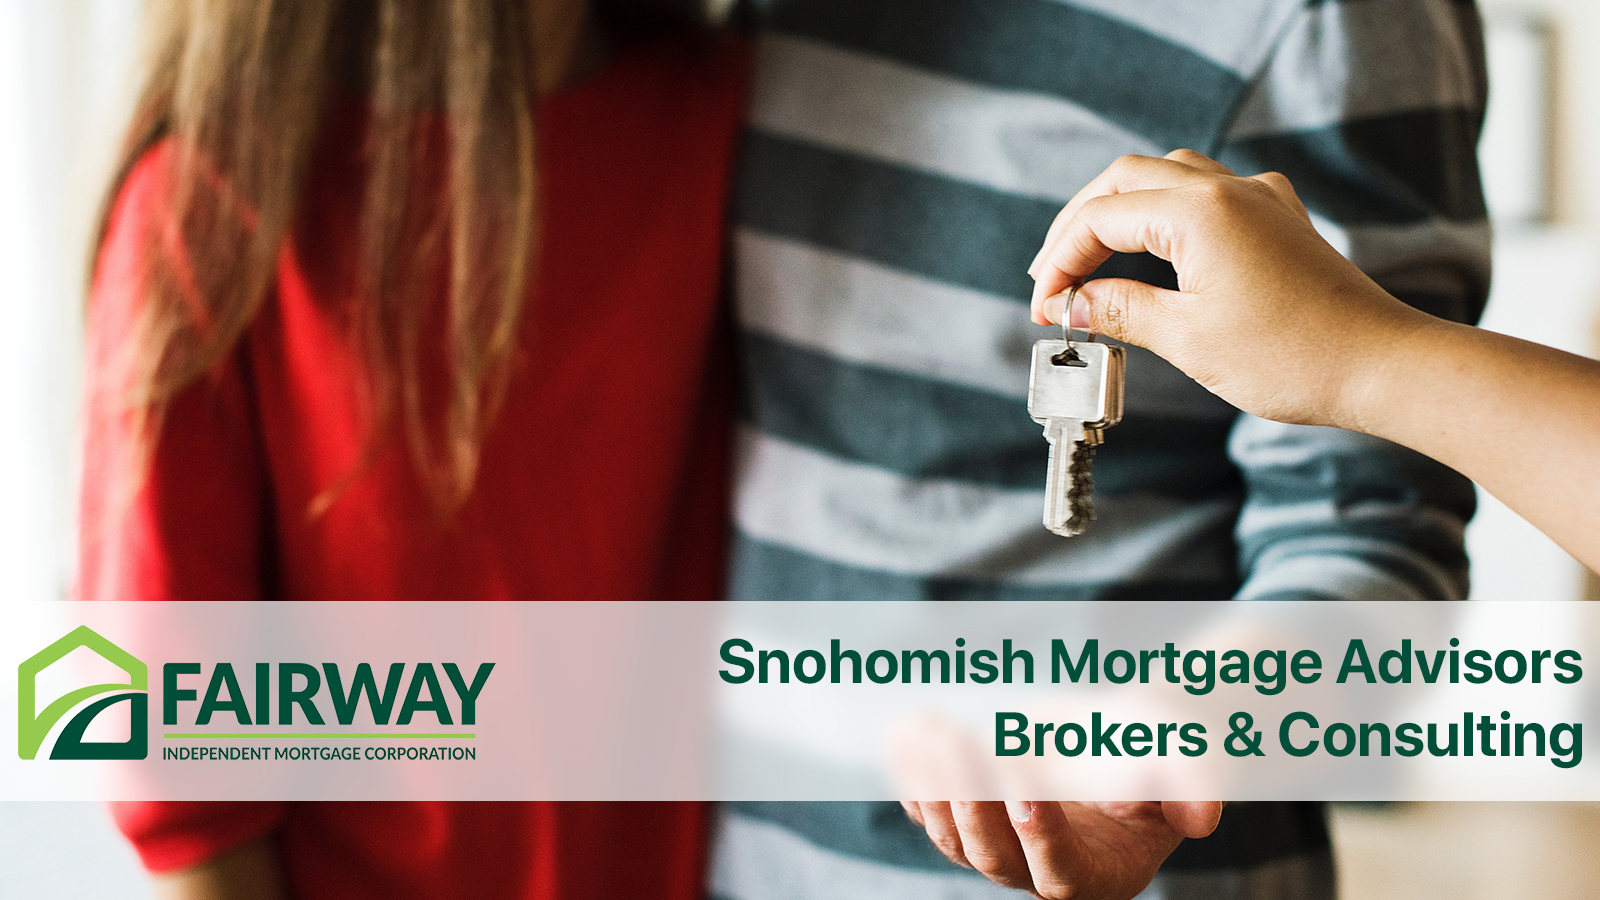 Snohomish-Mortgage-Advisors-Brokers-Consulting